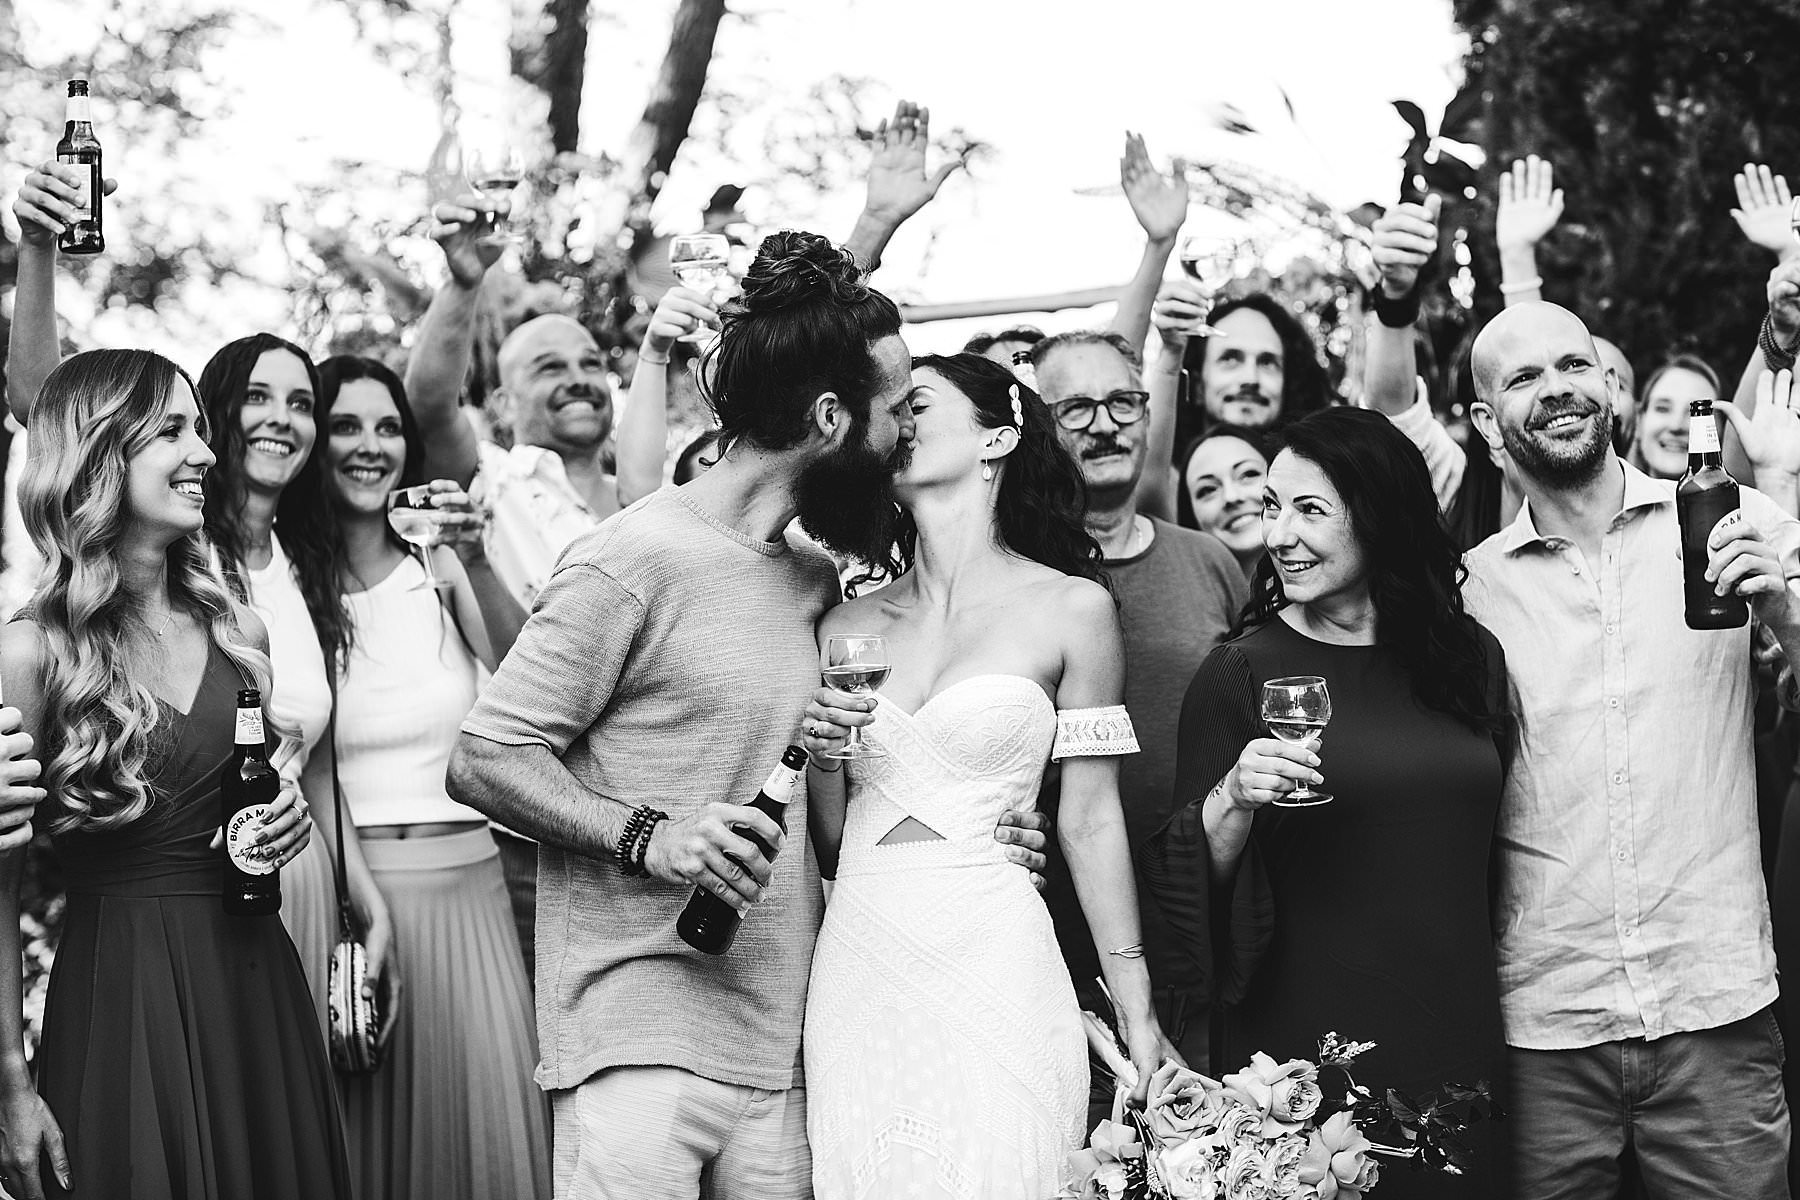 Emotional and fun intimate destination wedding in the heart of Tuscany at La Valle farmhouse near Montaione